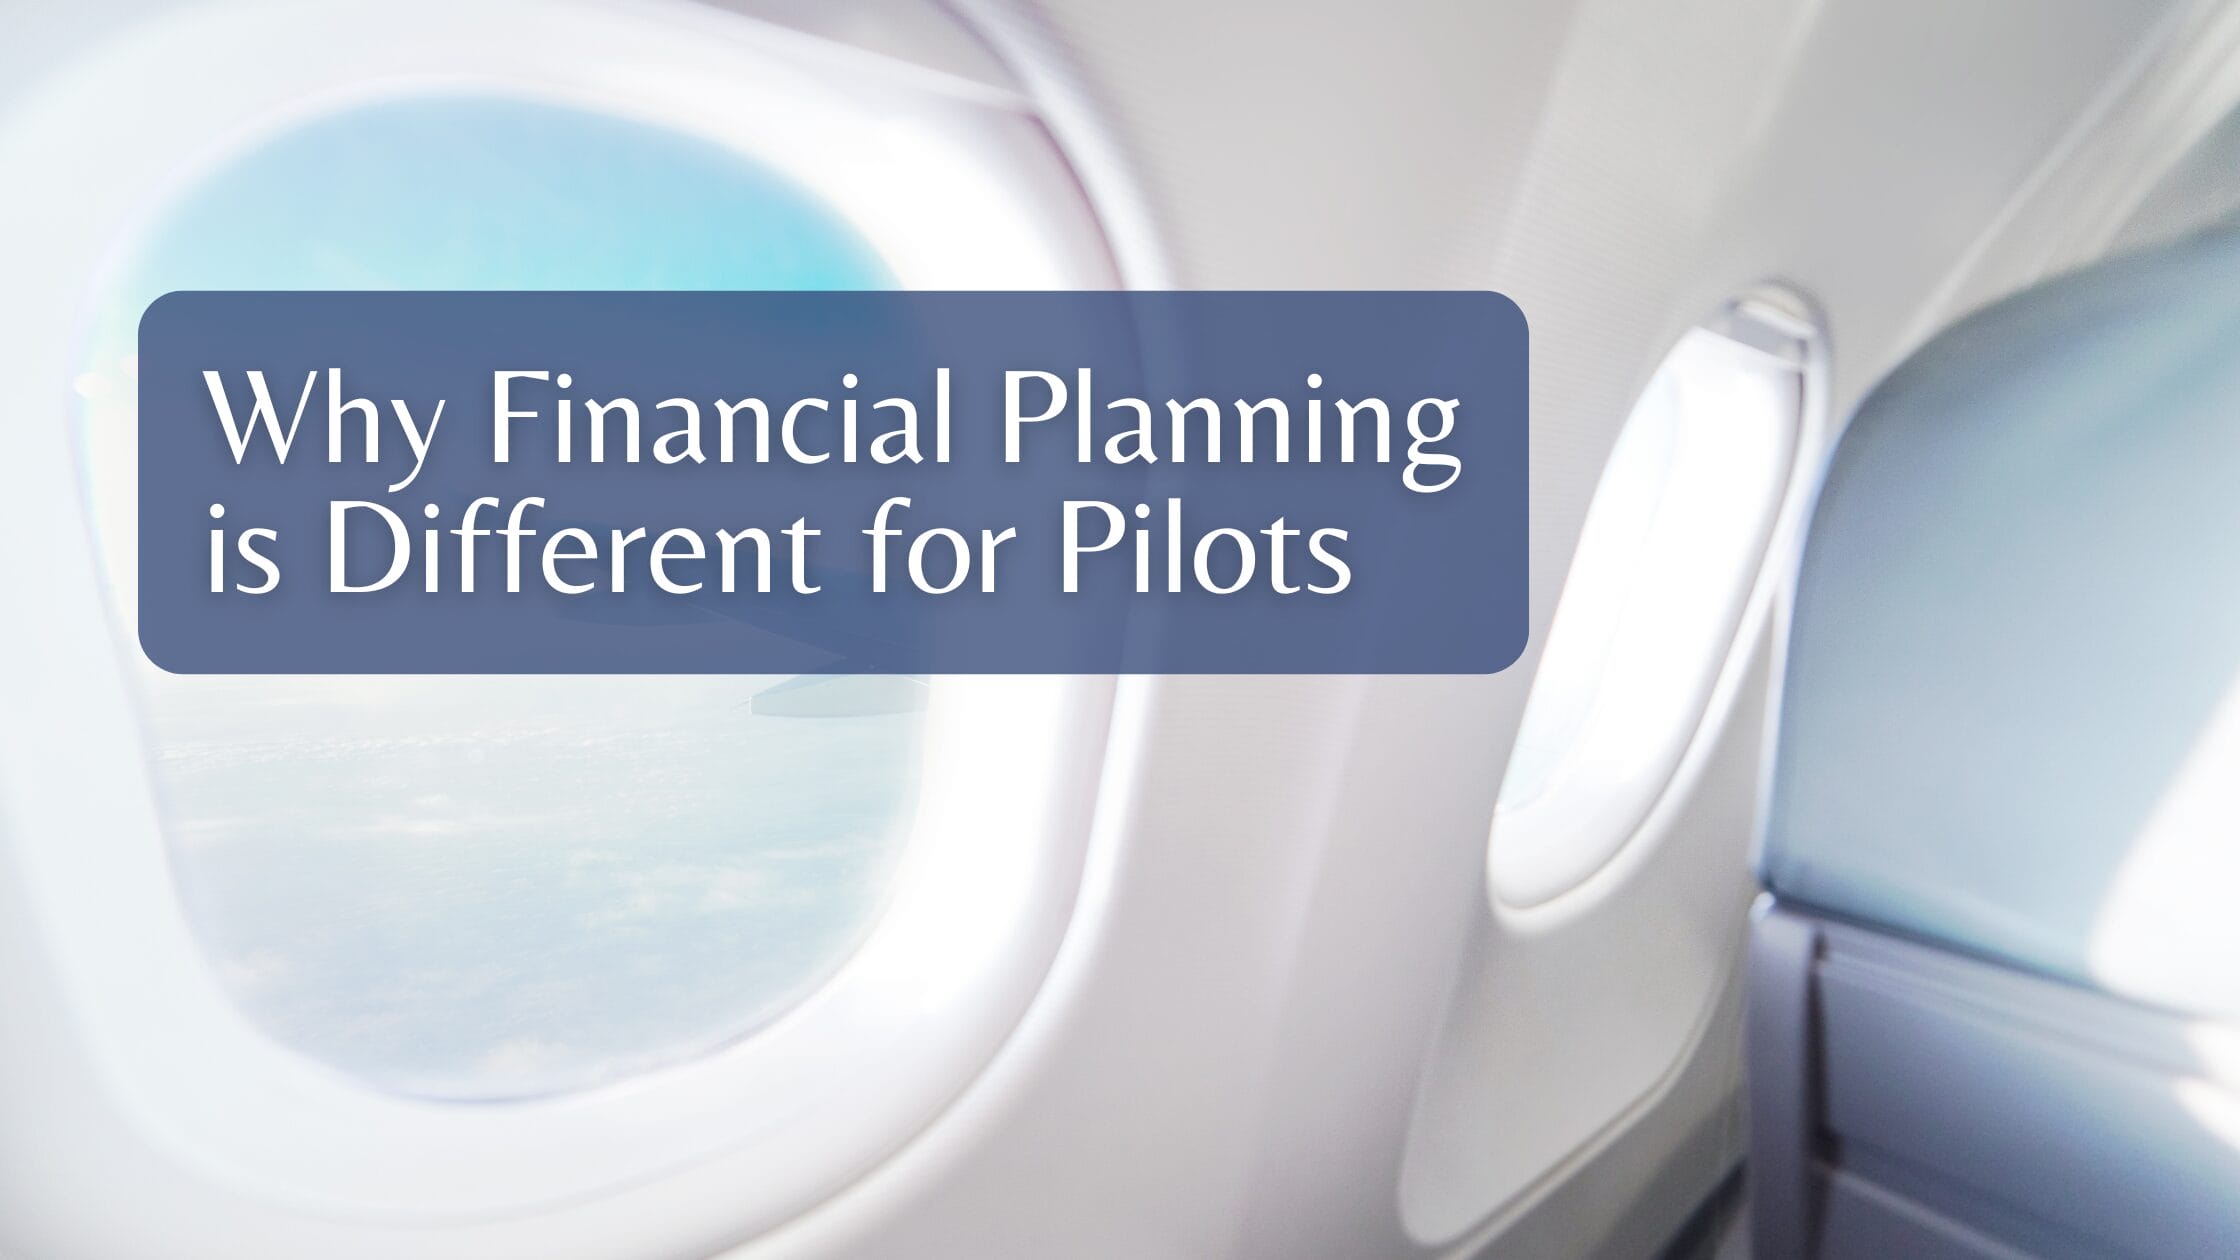 Why Financial Planning is Different for Pilots